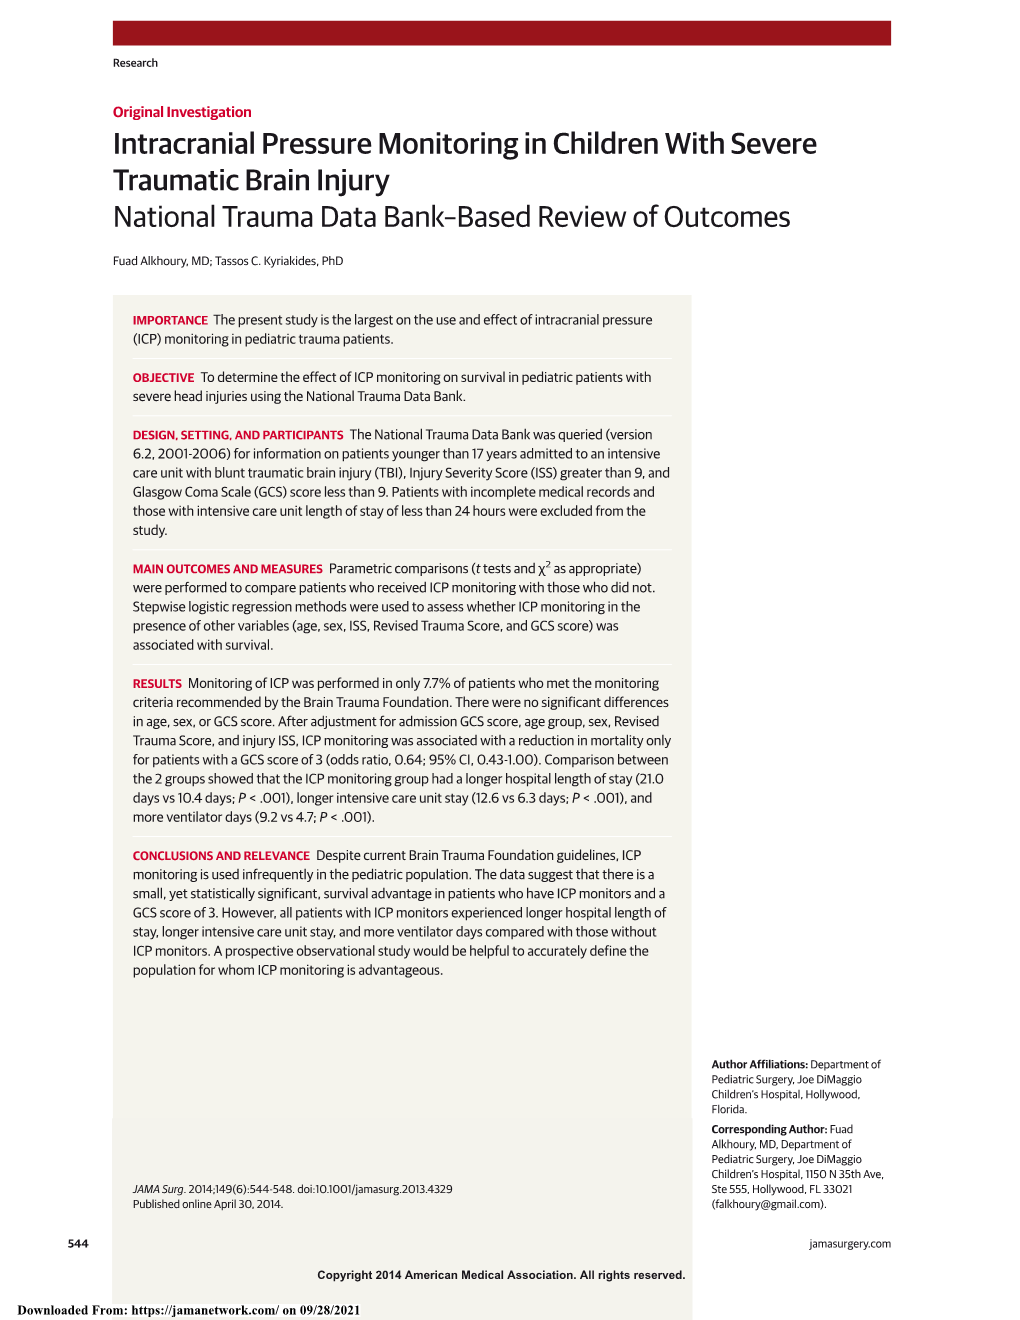 Intracranial Pressure Monitoring in Children with Severe Traumatic Brain Injury National Trauma Data Bank–Based Review of Outcomes